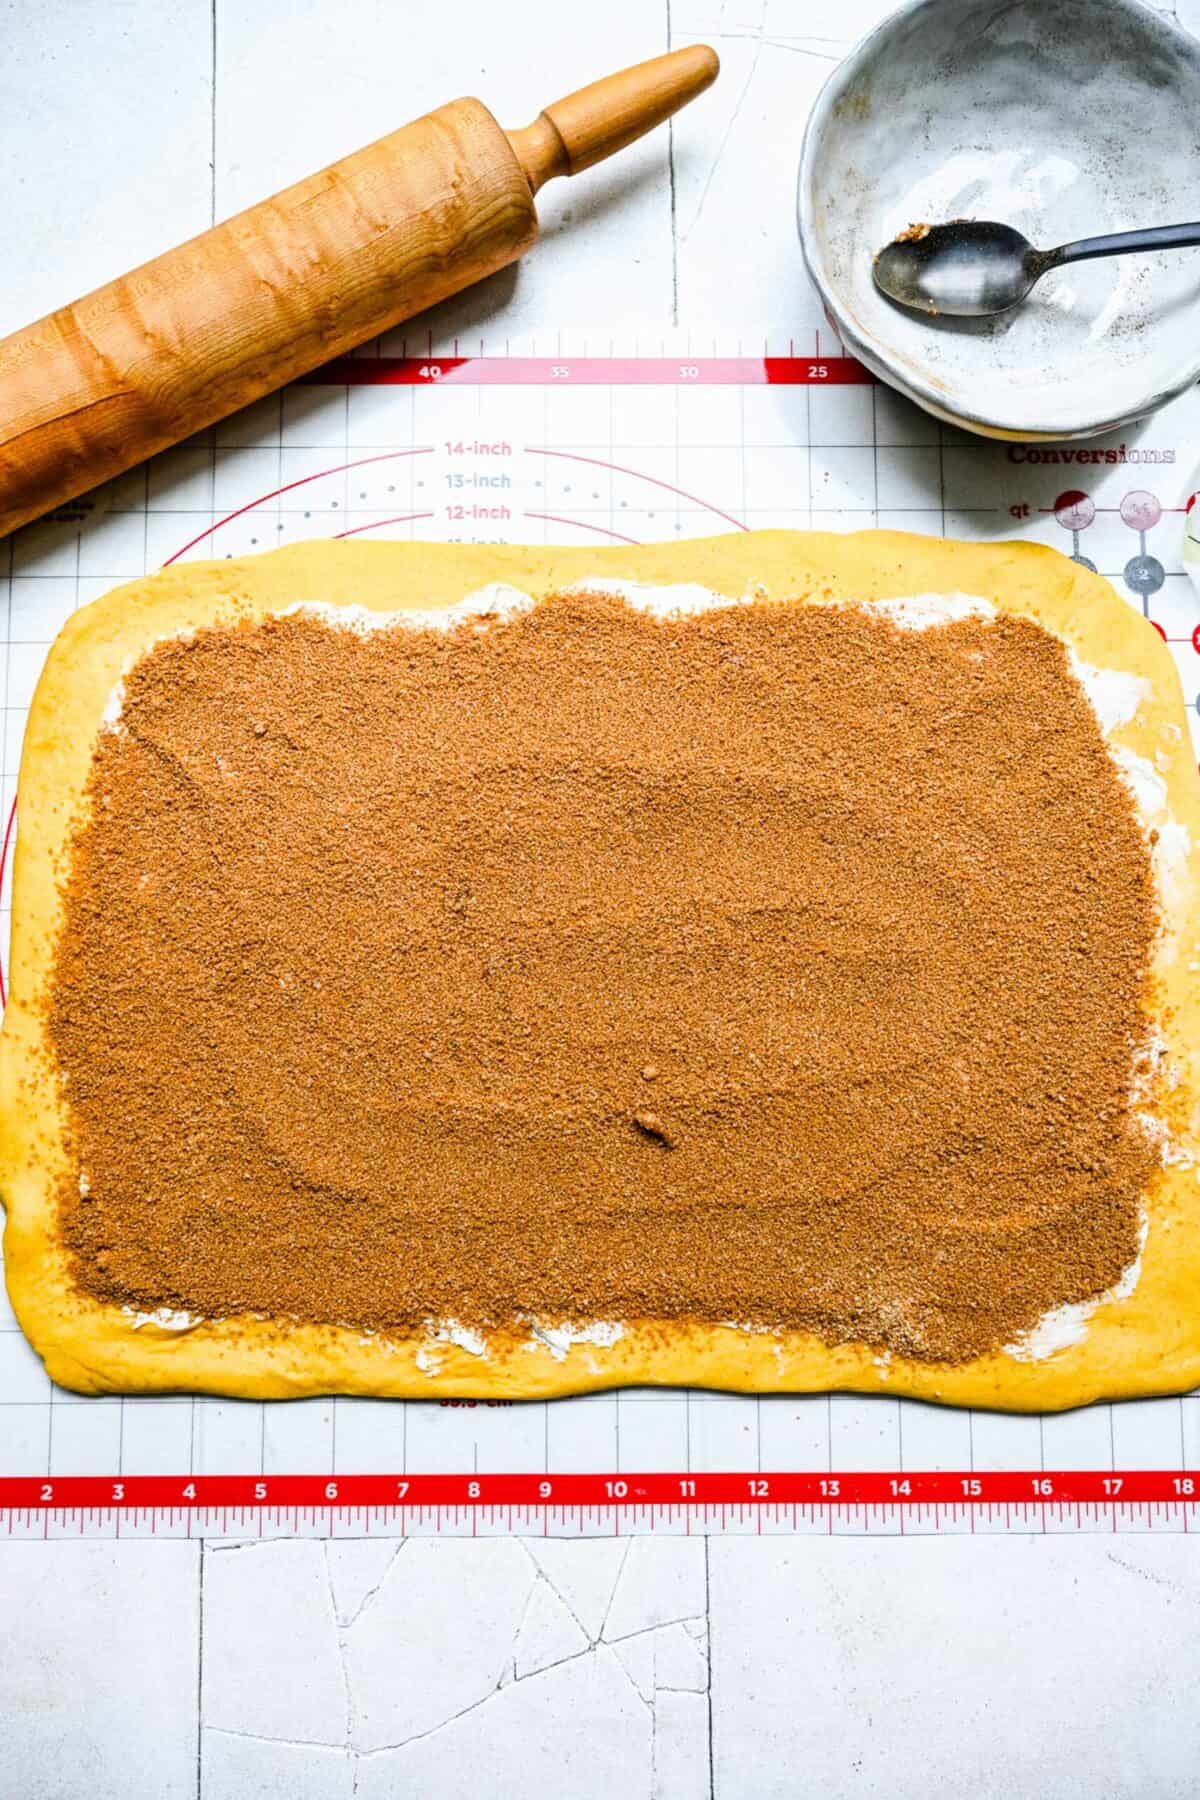 A rectangle of pumpkin cinnamon roll dough covered with a layer of butter and a spice mixture on a ruler mat, next to a rolling pin and an empty bowl with a spoon in it